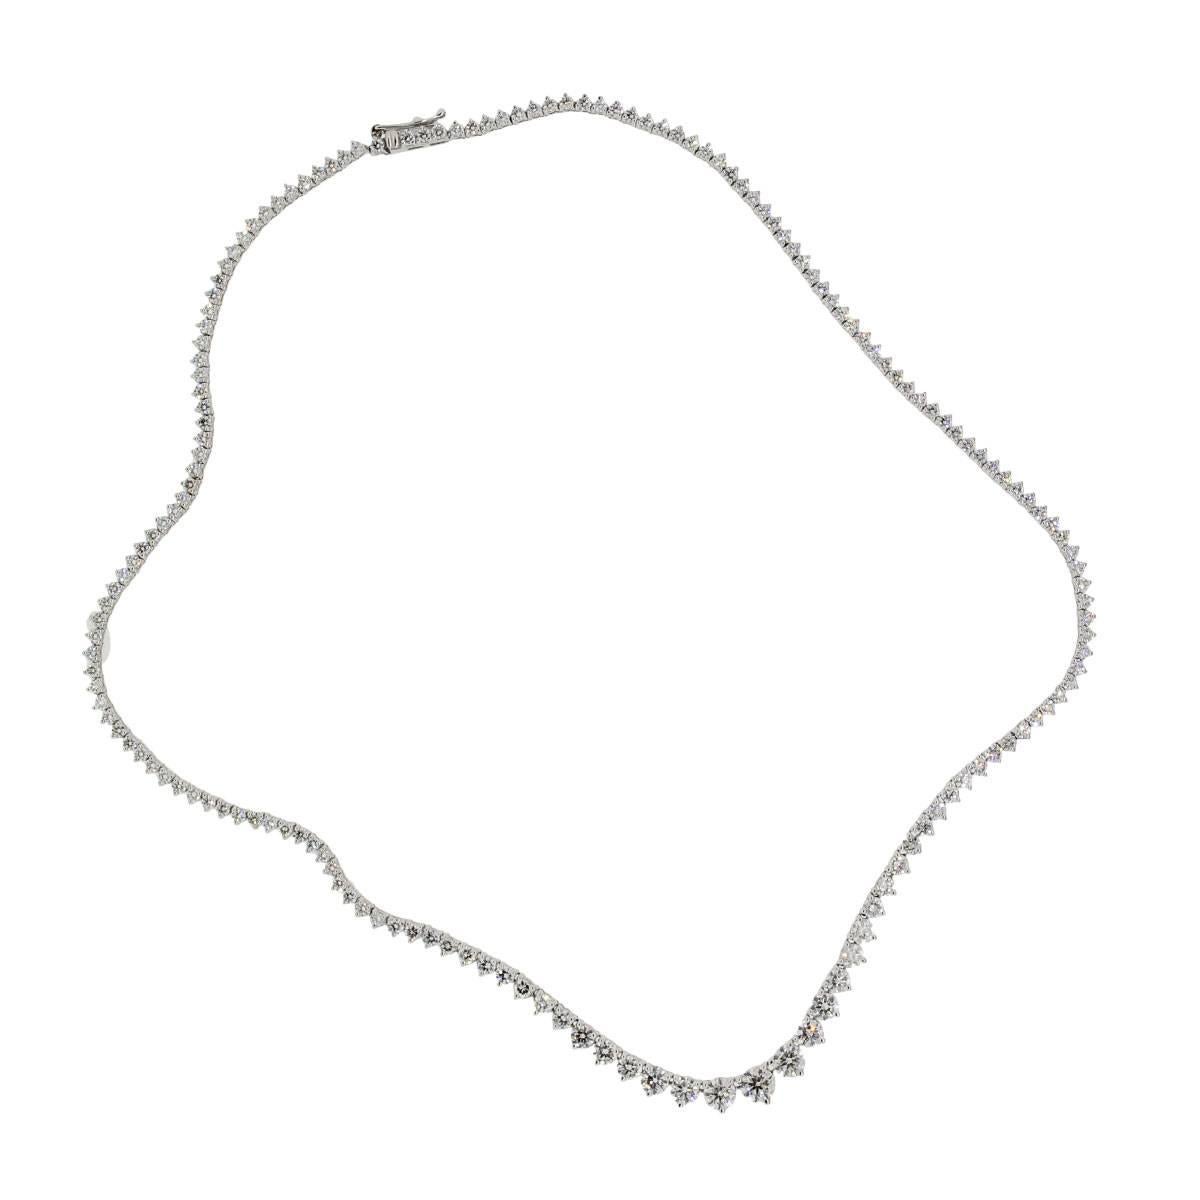 Material: 18k white gold
Diamond Details: Approximately 8.66ctw of round brilliant diamonds. Diamonds are G/H in color and VS in clarity
Necklace measurements: 16.75″ in length
Clasp: Tongue in box with safety clasp
Total Weight: 15.9g